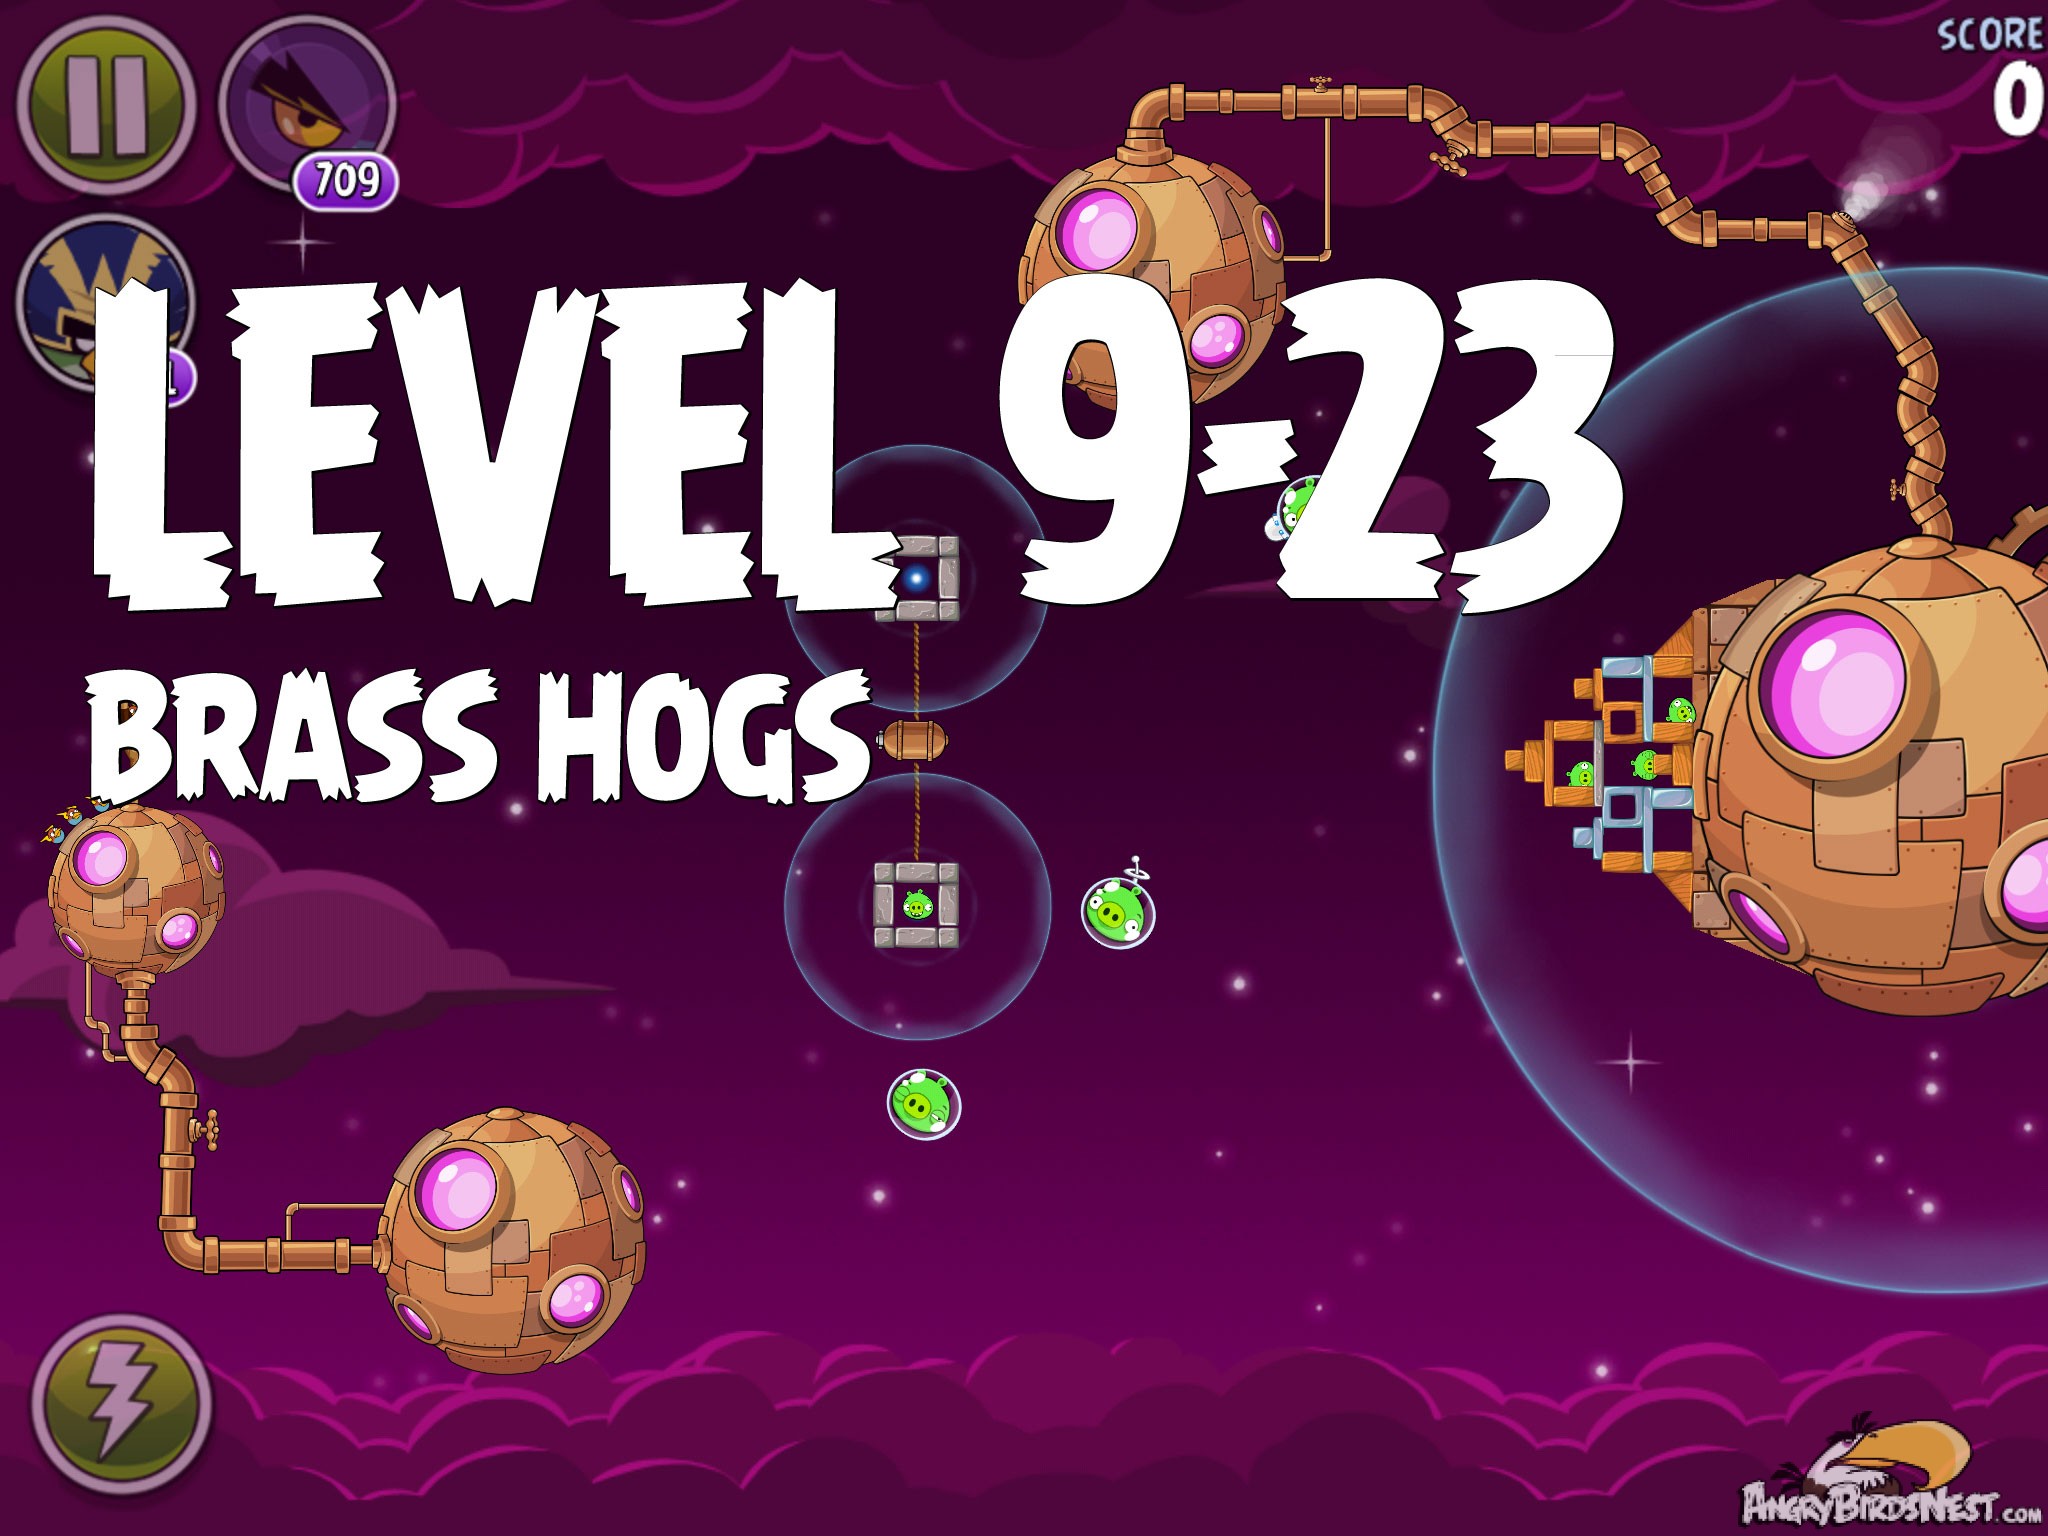 Angry Birds Space Brass Hogs Level 9-23